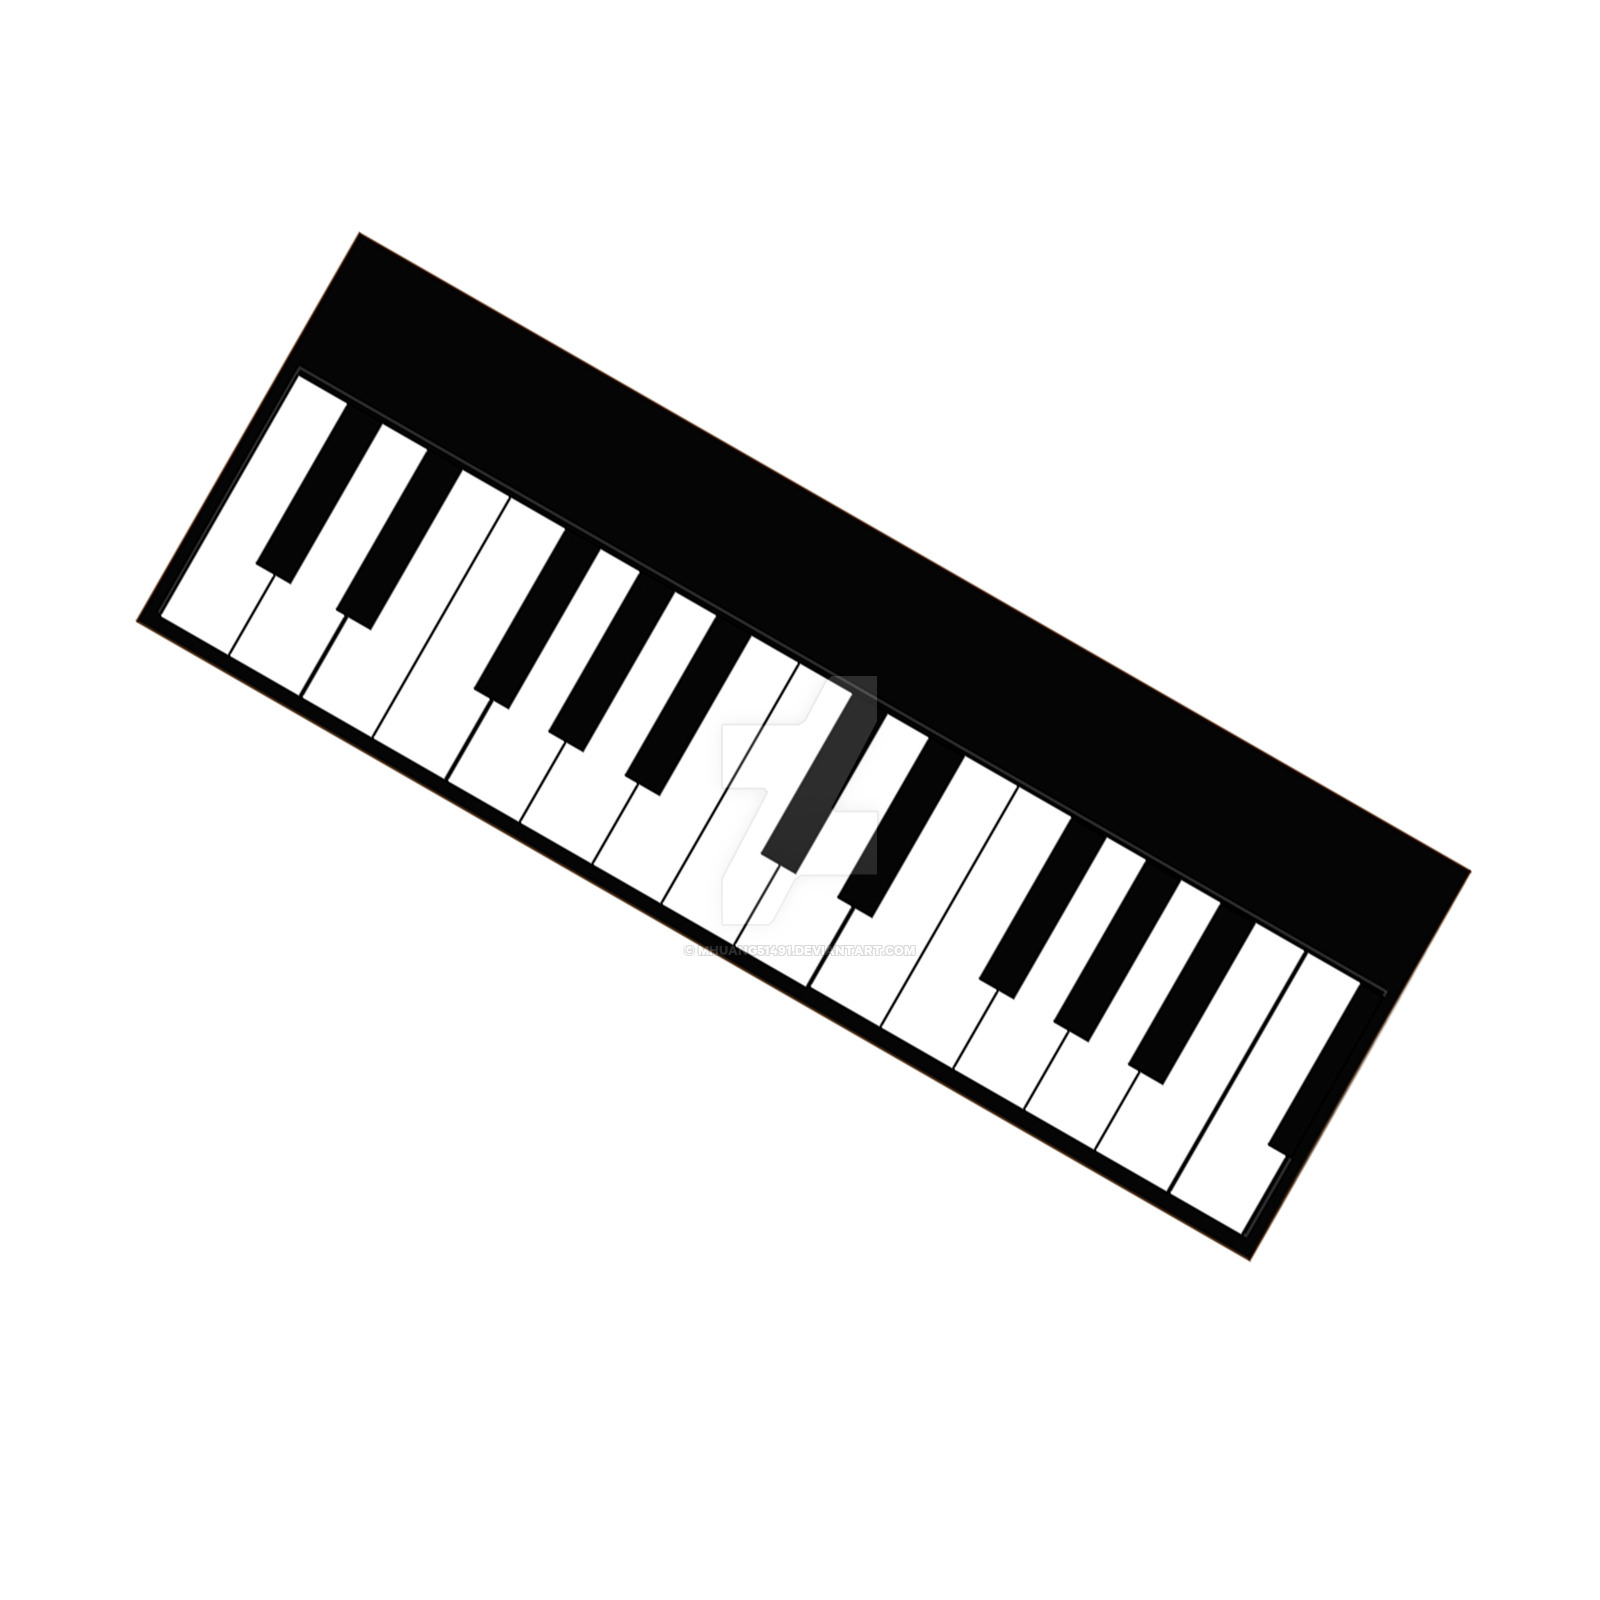 Piano Vector Stamp by MHuang51491 on DeviantArt